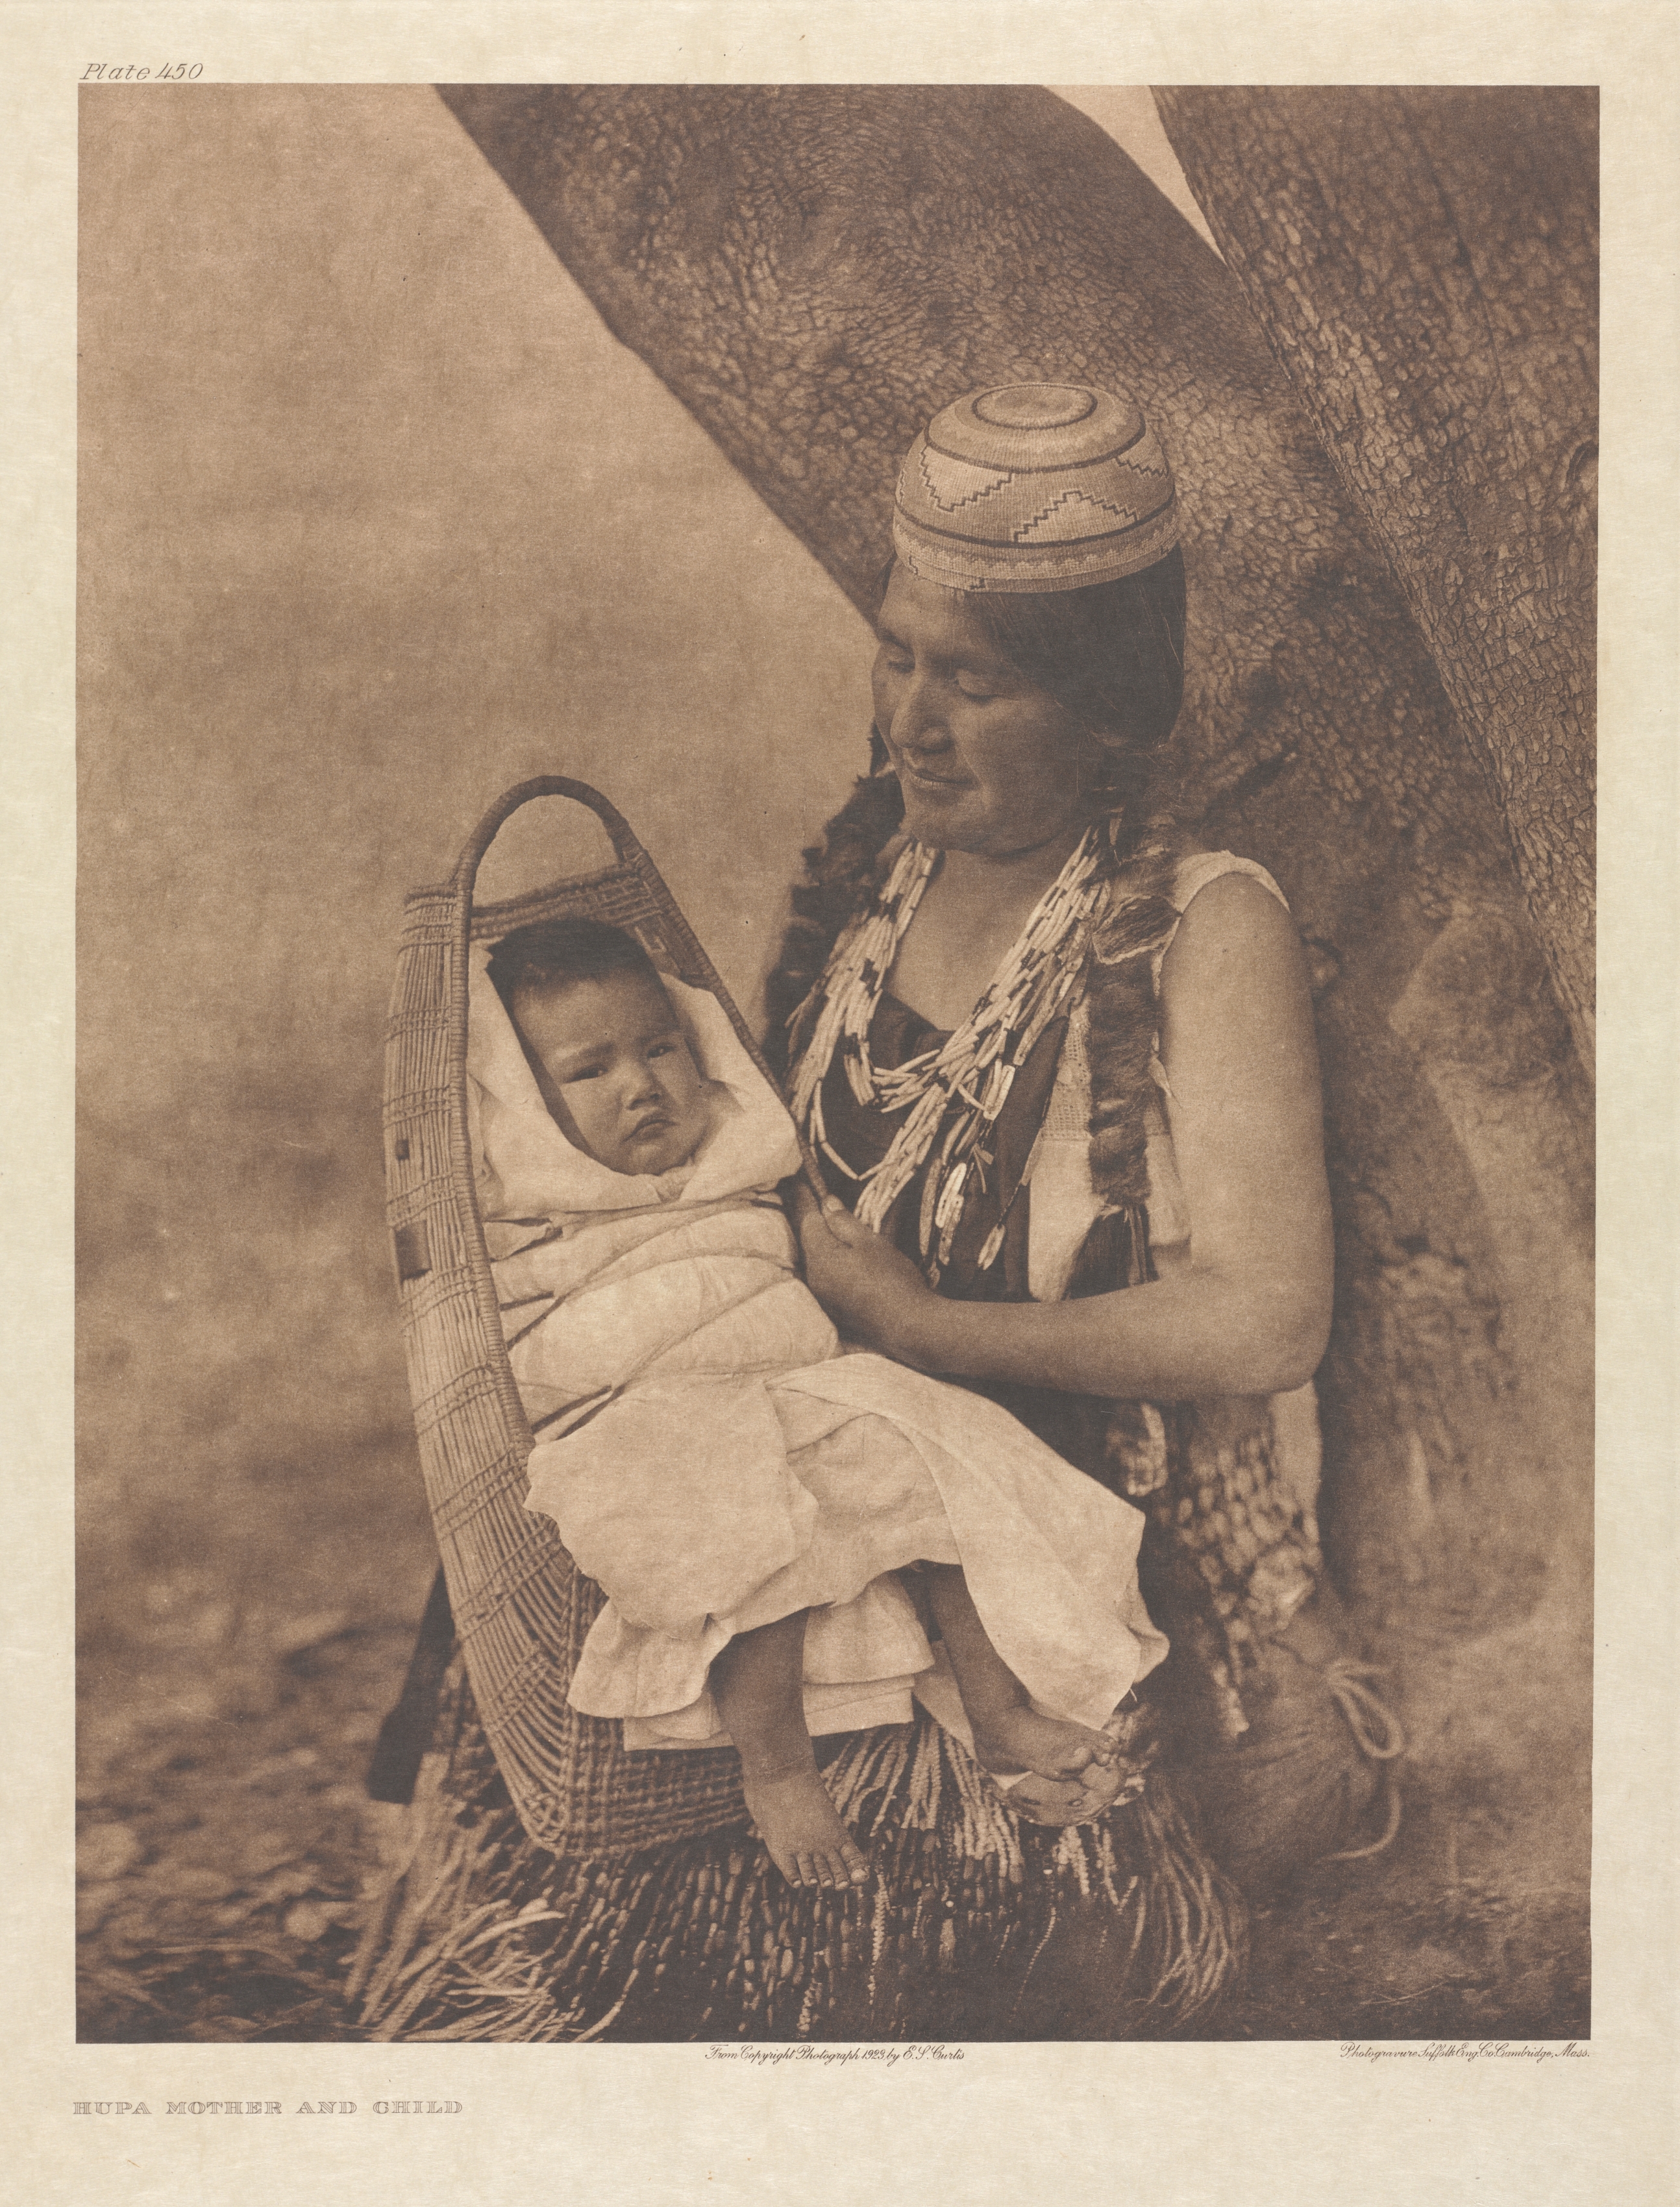 Portfolio XIII, Plate 450: Hupa Mother and Child